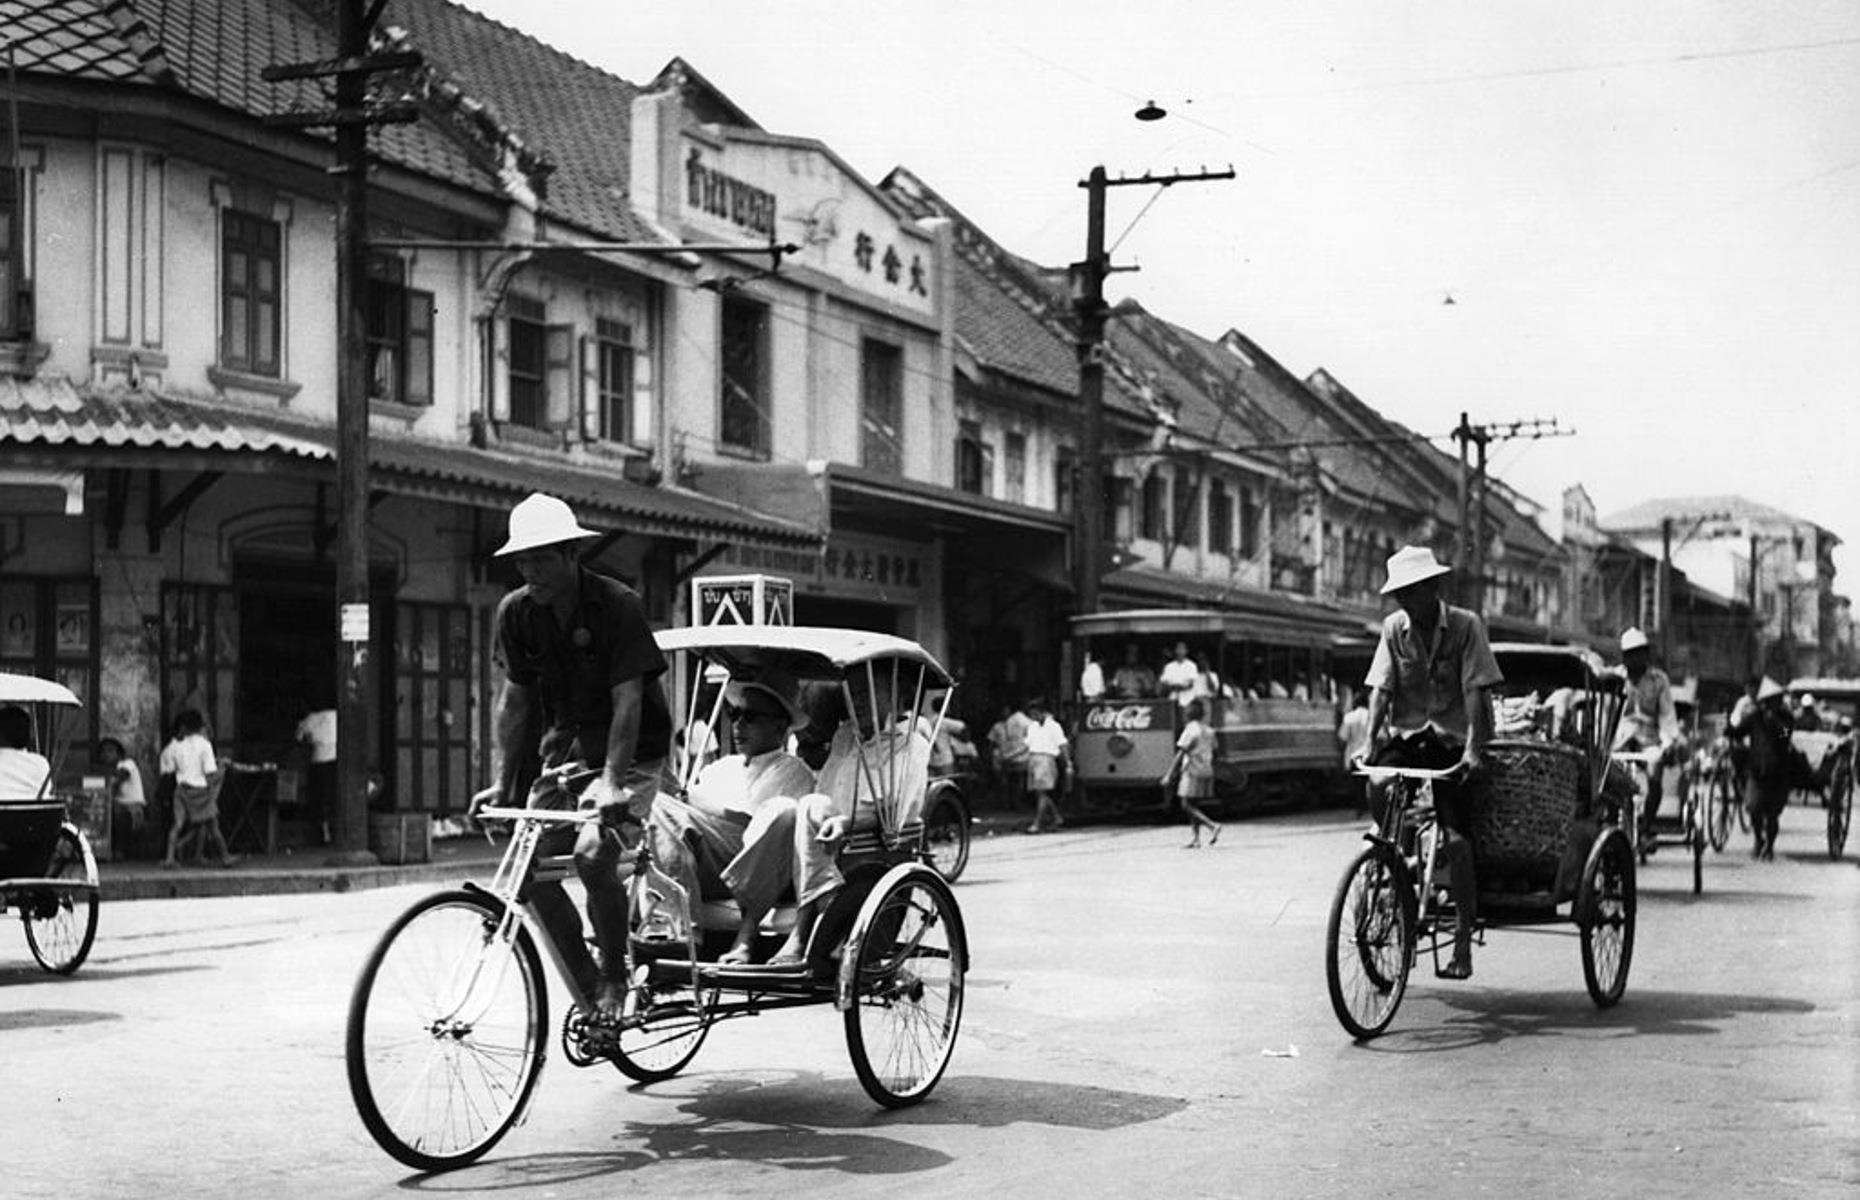 As the country sided with Japan in the Second World War, it was heavily bombed, but received American aid afterwards. The economy grew and during the 1950s, tourism to the city increased. These pedal-powered rickshaws were then a very common means of transport, and this Fifties snap shows a scene worlds away from the modern metropolis we're now familiar with.